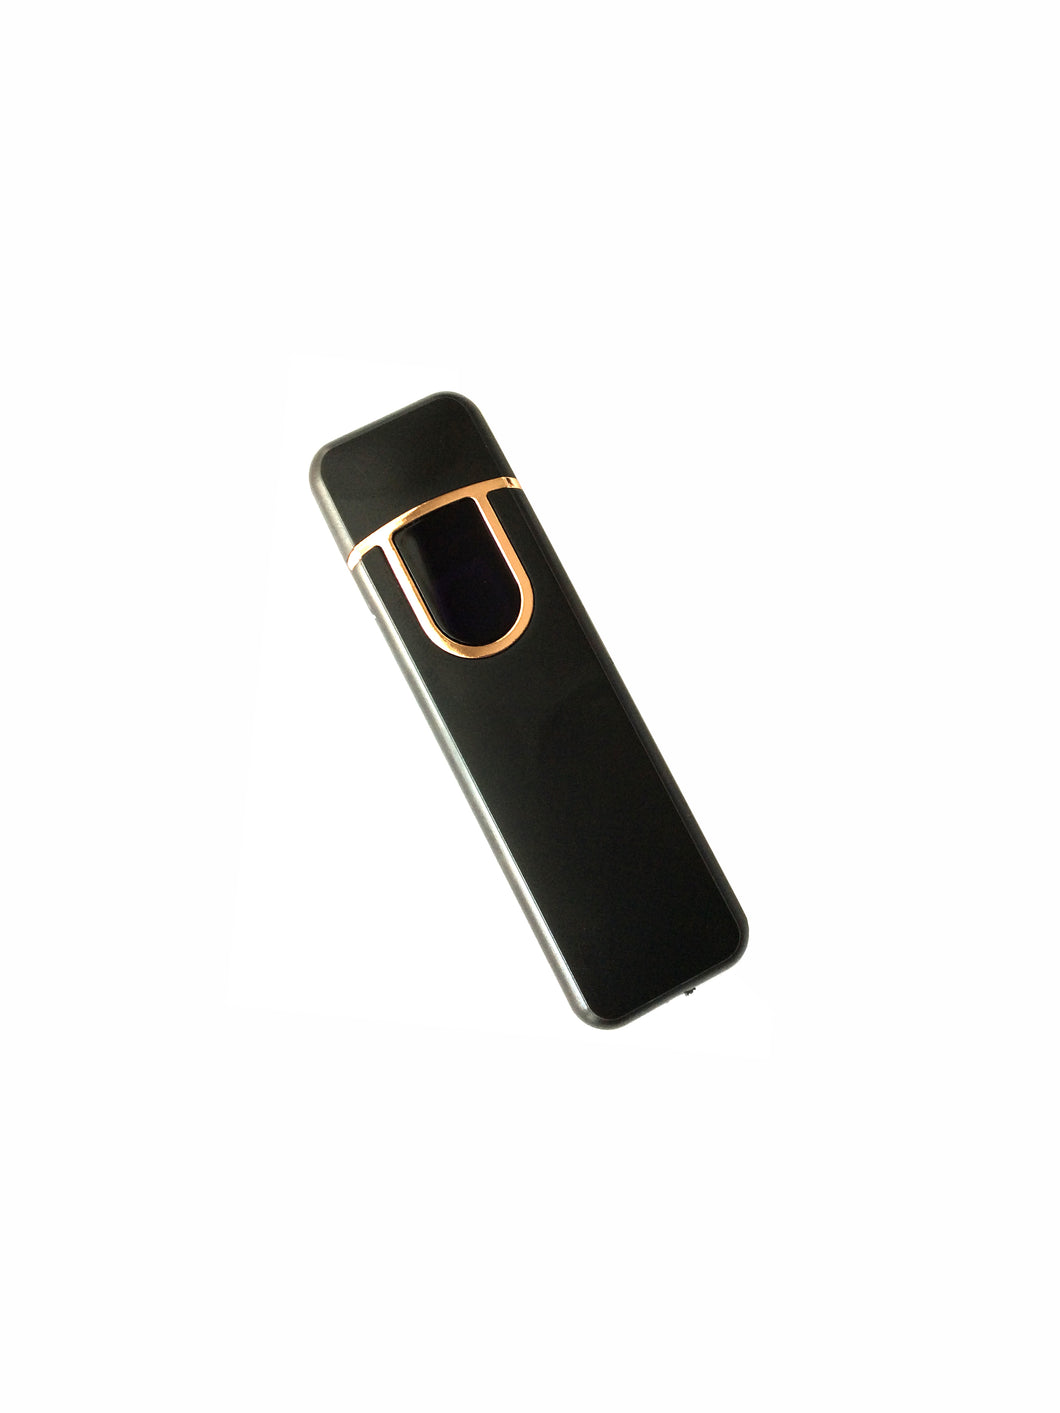 The Flip Top Electronic Rechargeable USB Lighter